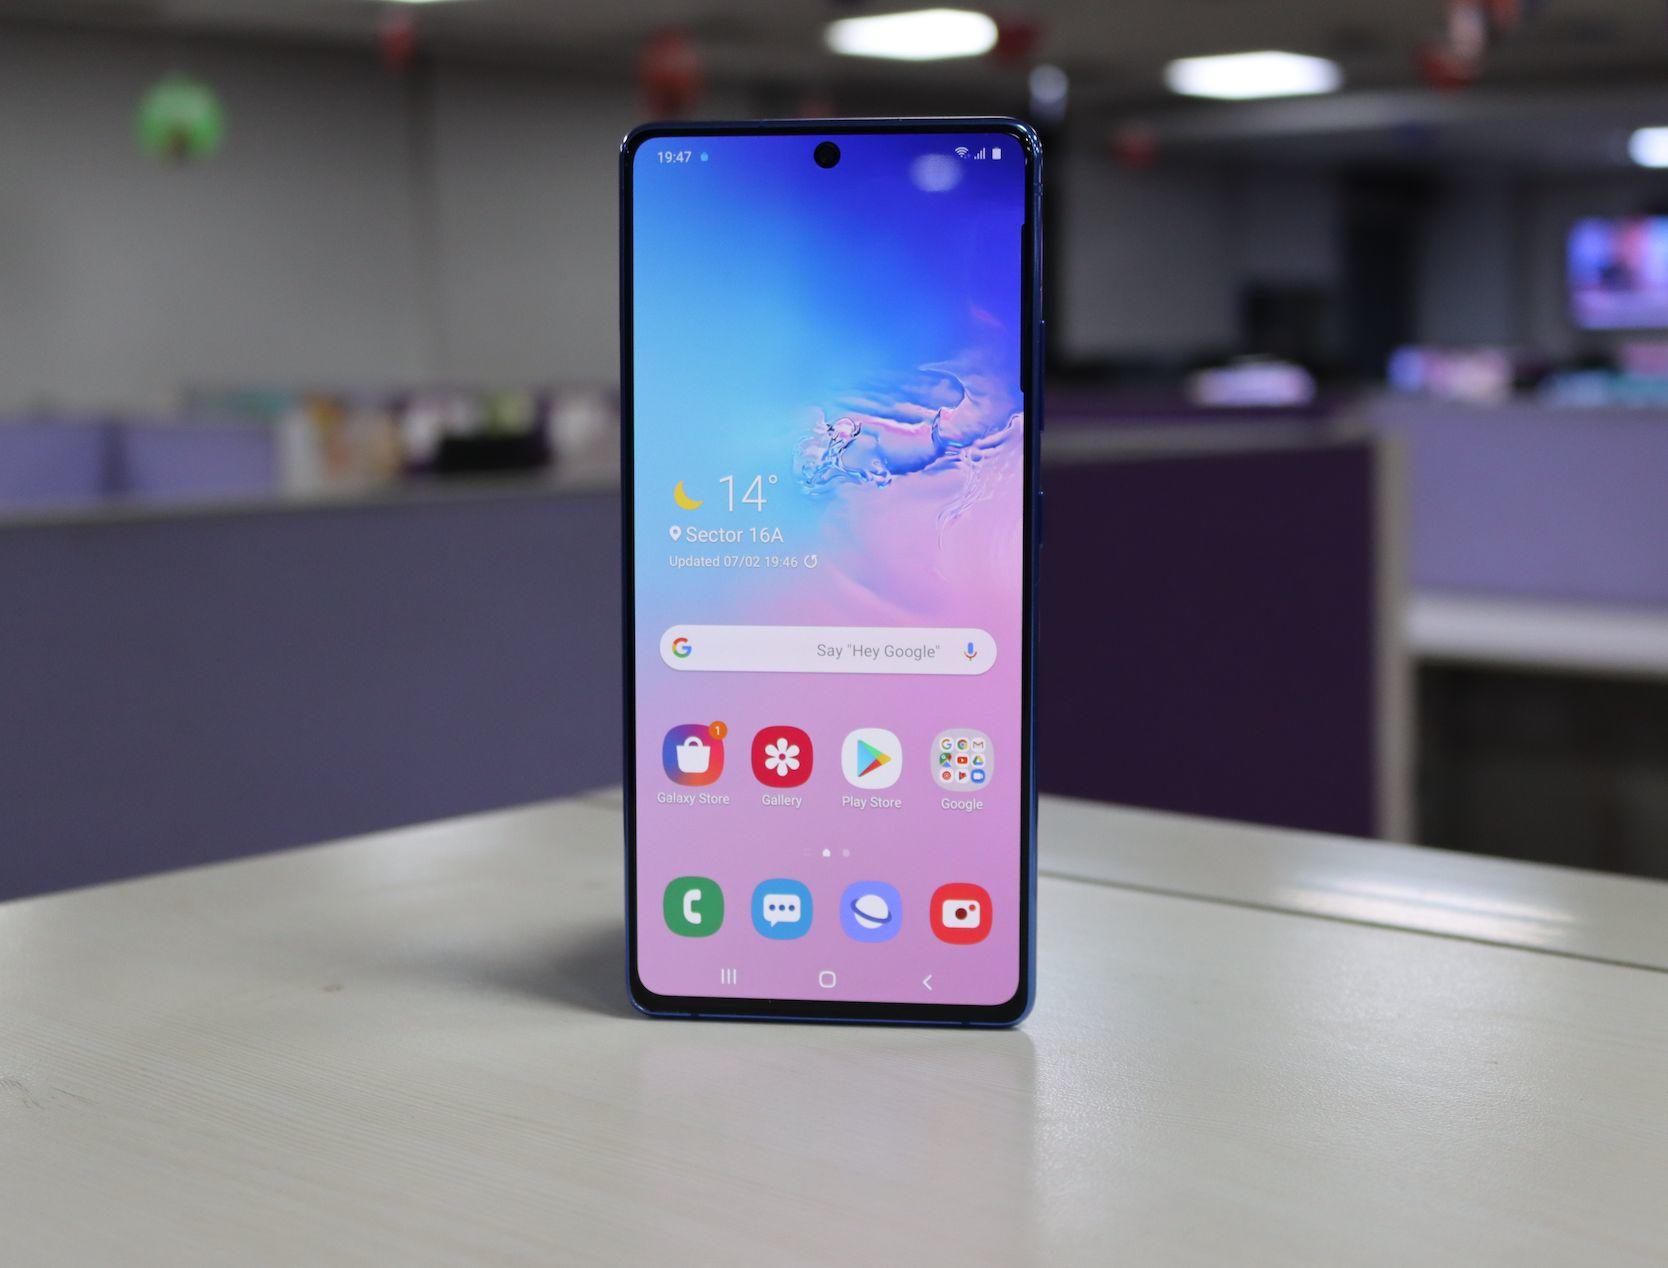 Samsung Galaxy S10 Lite takes on the OnePlus 7 Pro and others